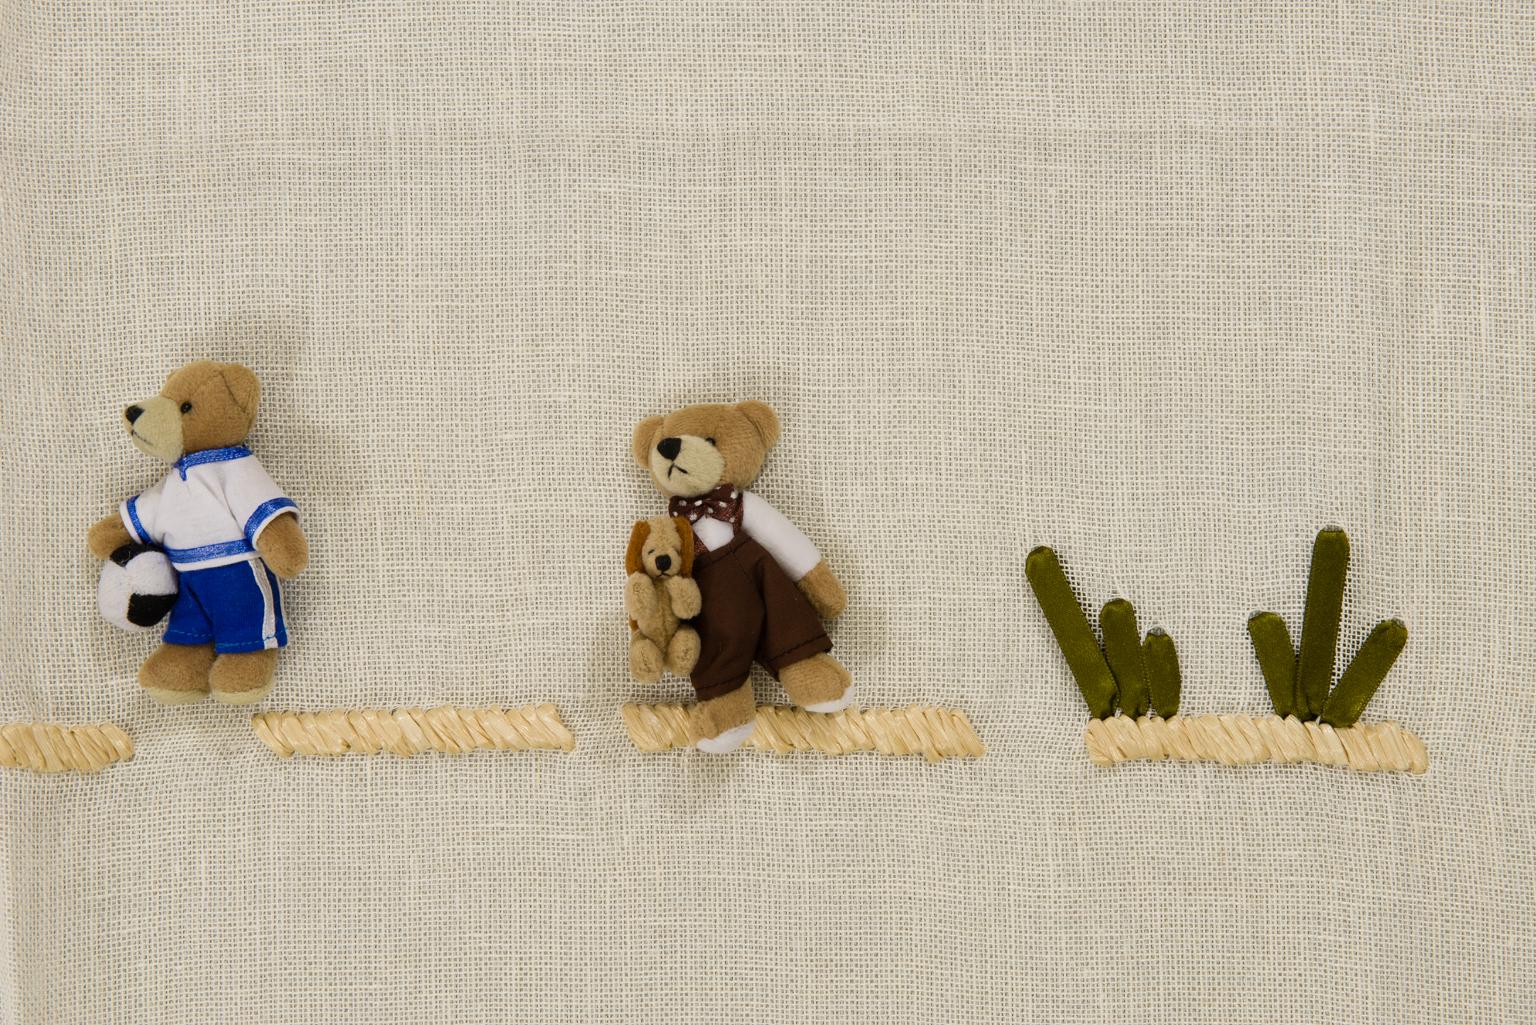 Modern Embroidered Curtain for a Baby Room with Teddy Bears For Sale